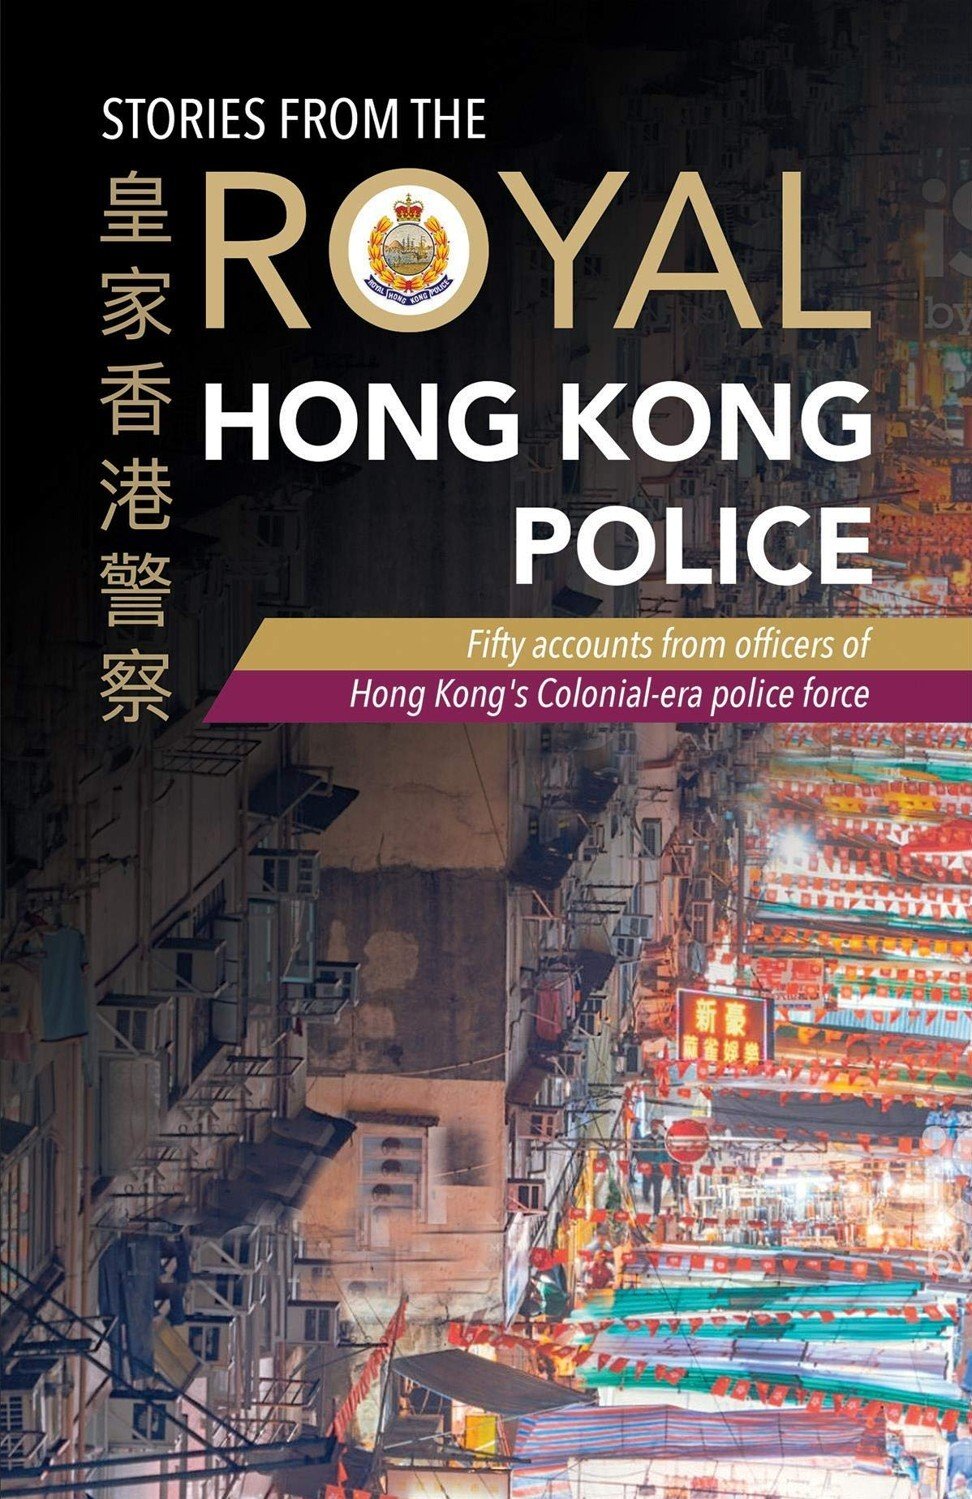 Stories from the Royal Hong Kong Police. Photo: Handout